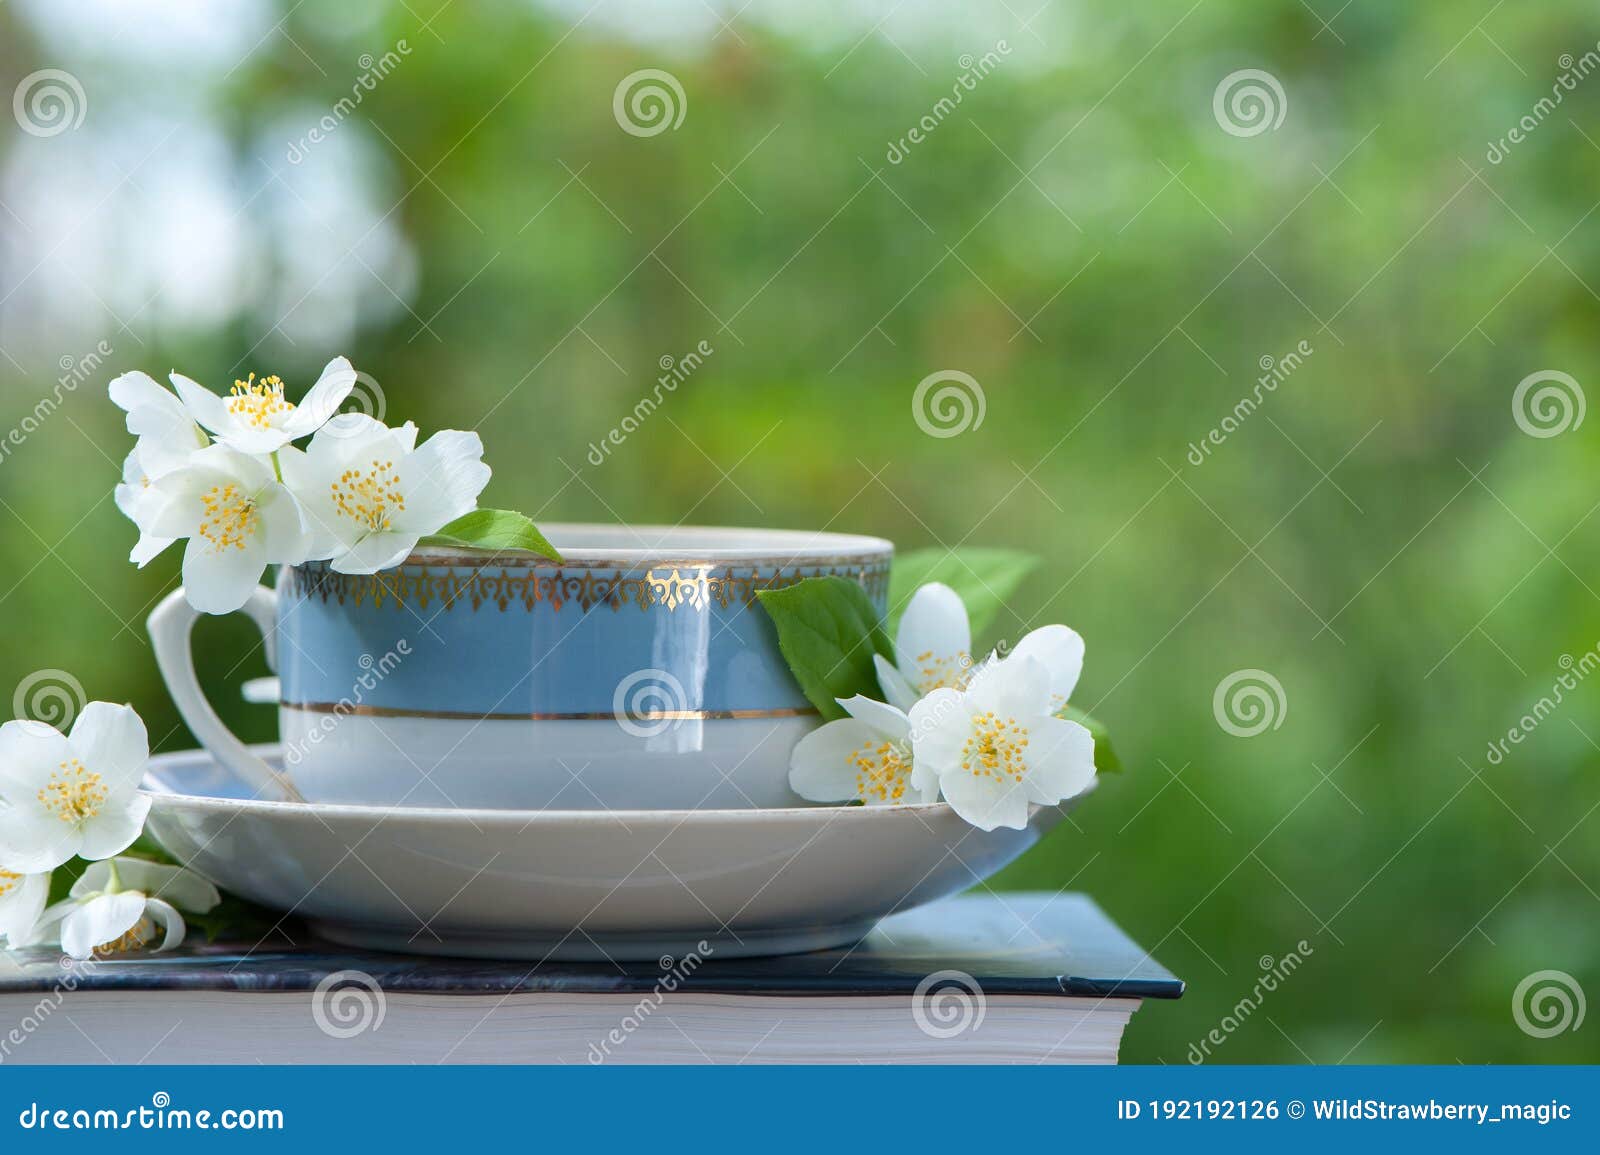 Beautiful Summer Composition of a Cup of Tea, Book and Jasmine ...